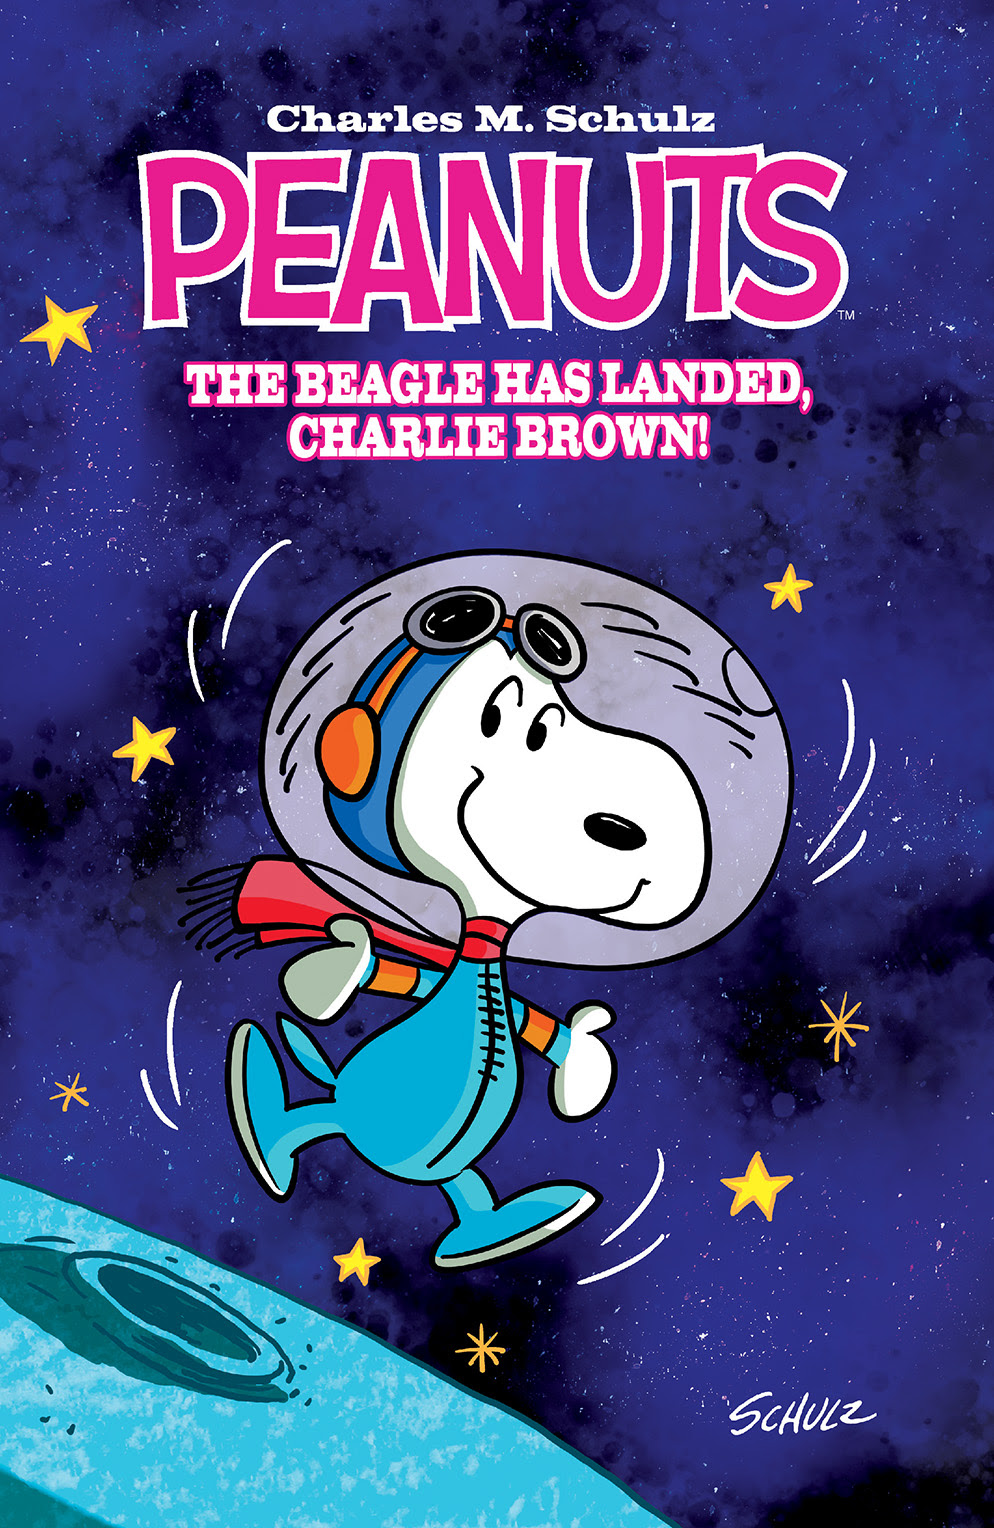 PEANUTS: THE BEAGLE HAS LANDED, CHARLIE BROWN OGN TP Cover by Bob Scott